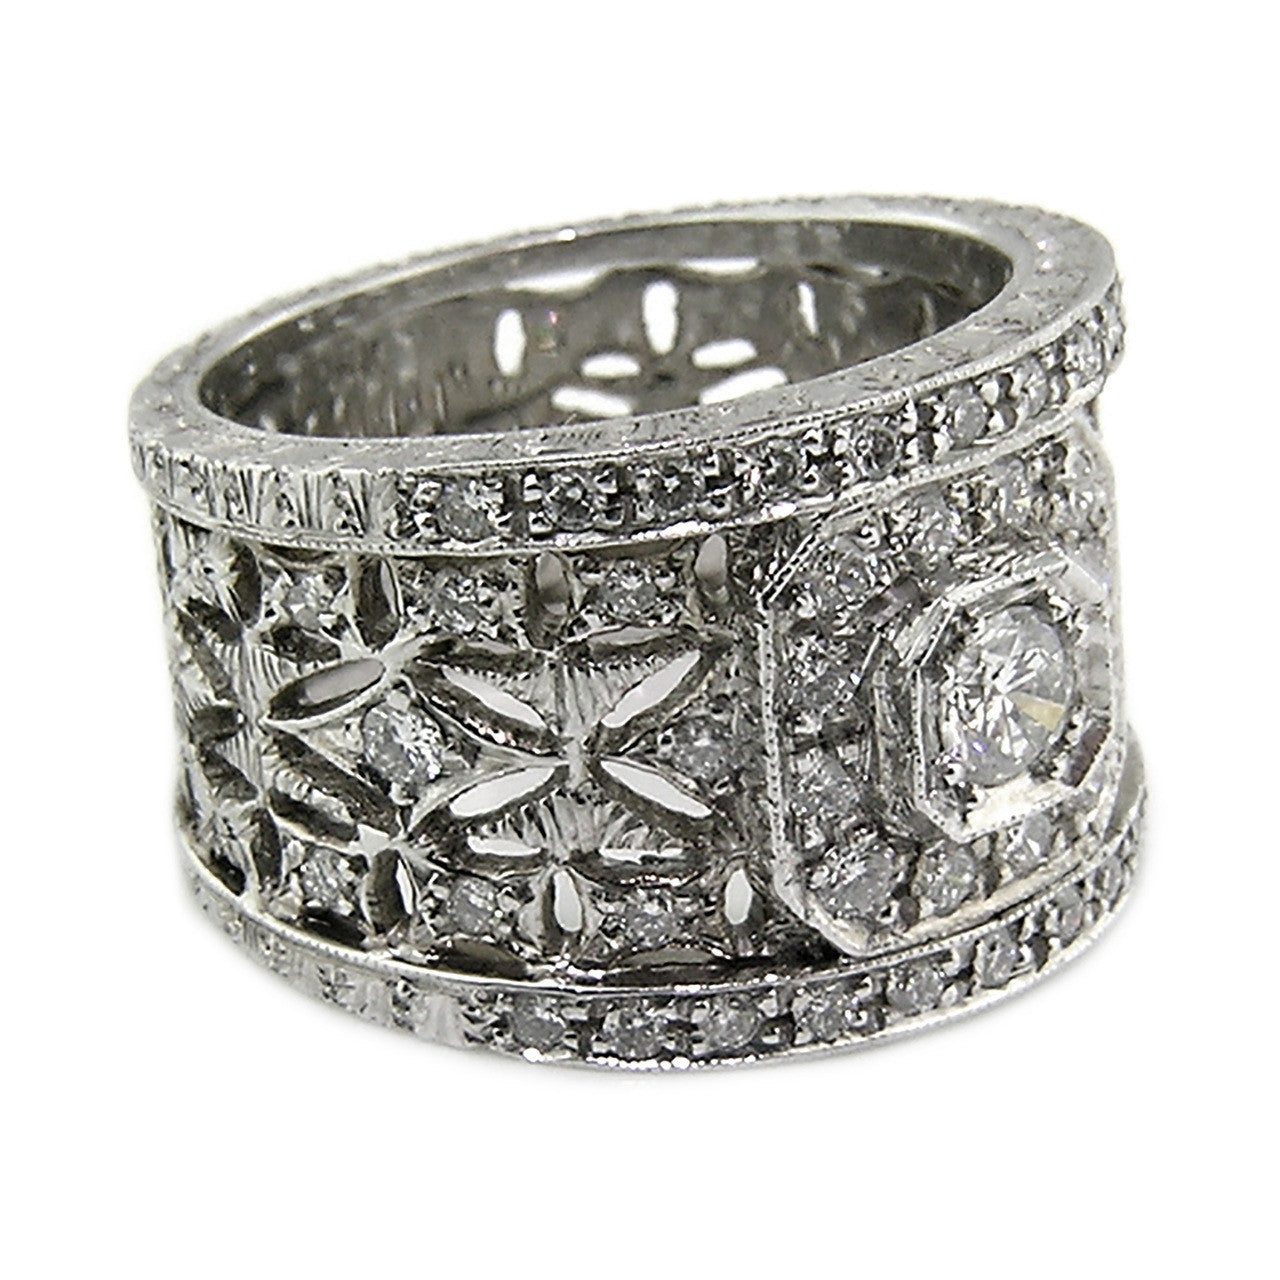 Florentine Lace Diamond 18kt Ring made in Florence Italy for Cynthia Scott Jewelry